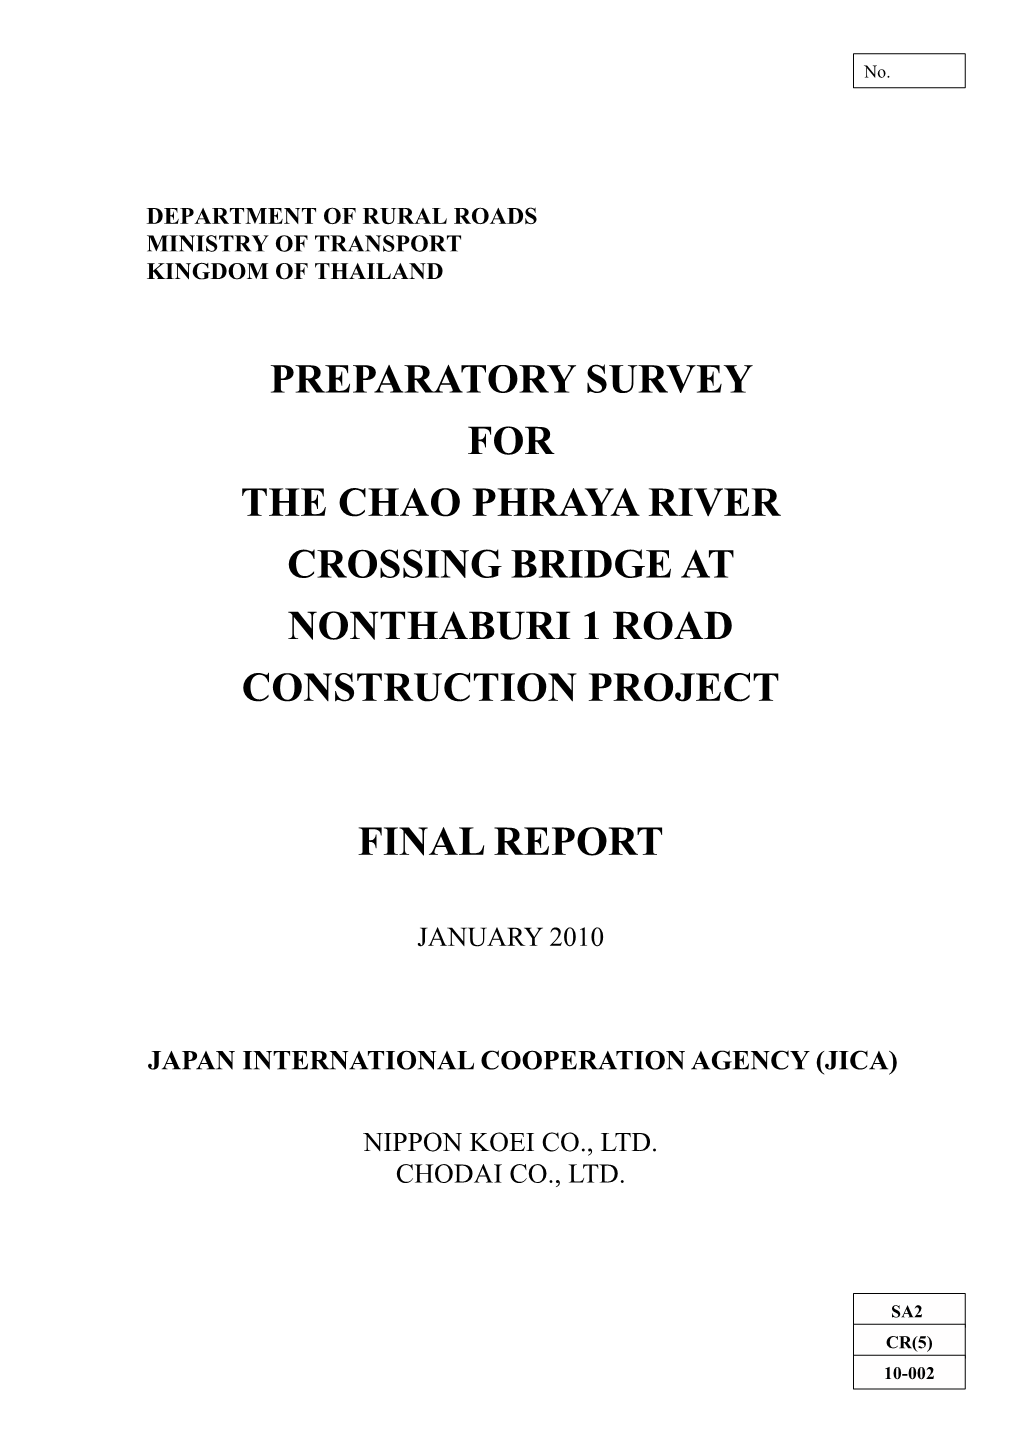 Preparatory Survey for the Chao Phraya River Crossing Bridge at Nonthaburi 1 Road Construction Project Final Report